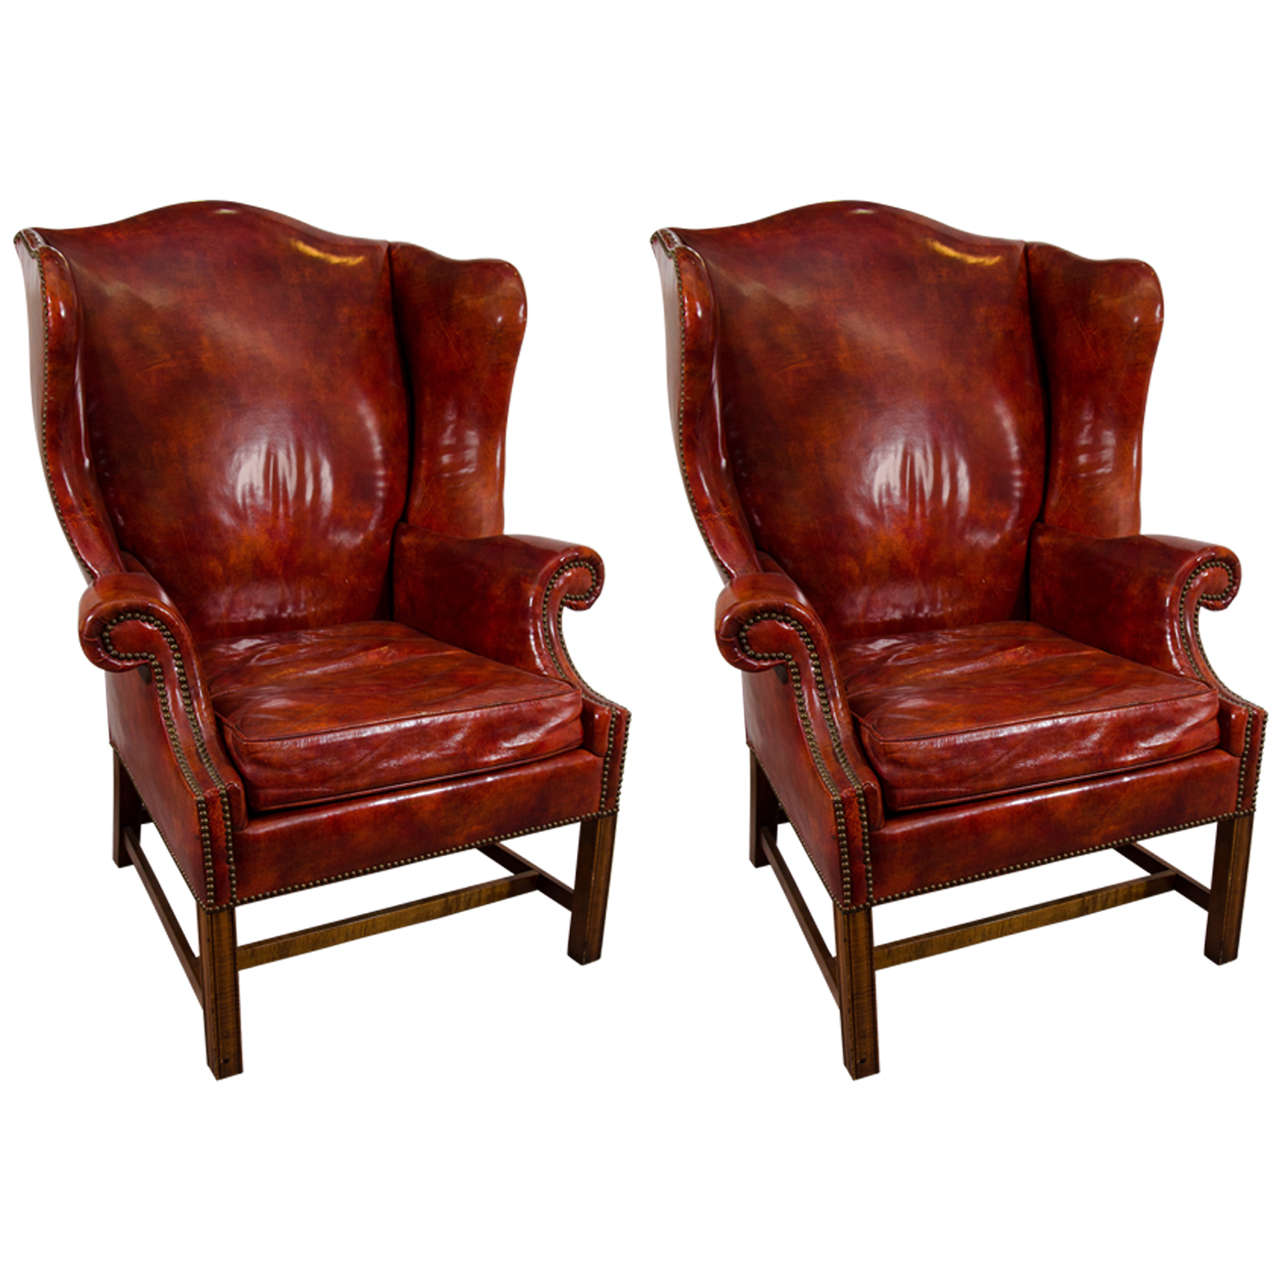 Midcentury Pair of Burgundy Leather Wing Chairs by Baker